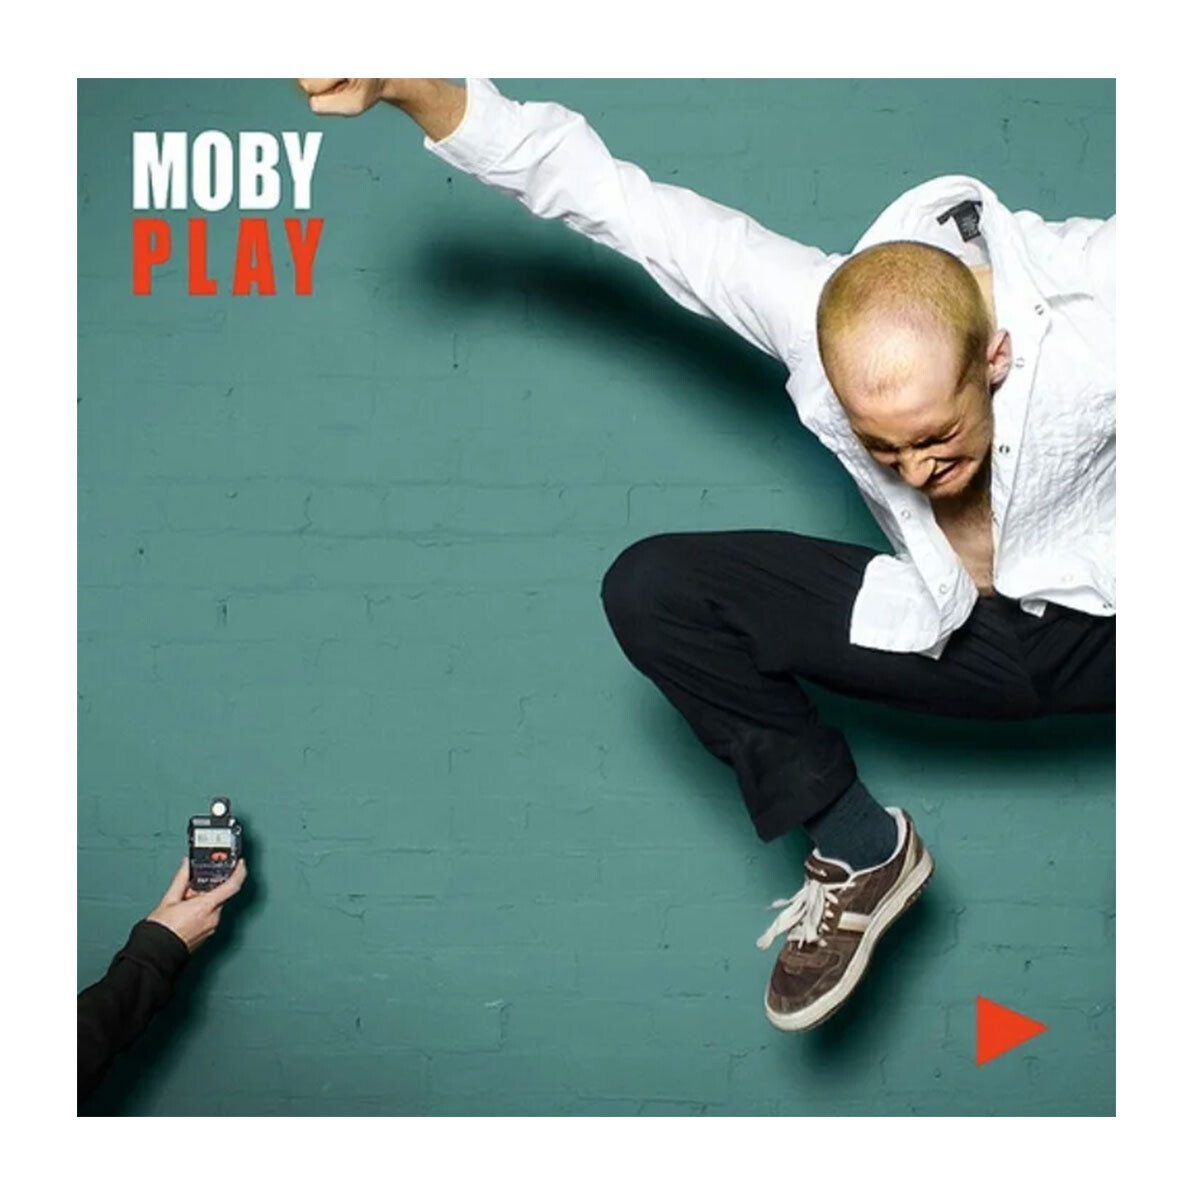 Moby-play - Vinilo 